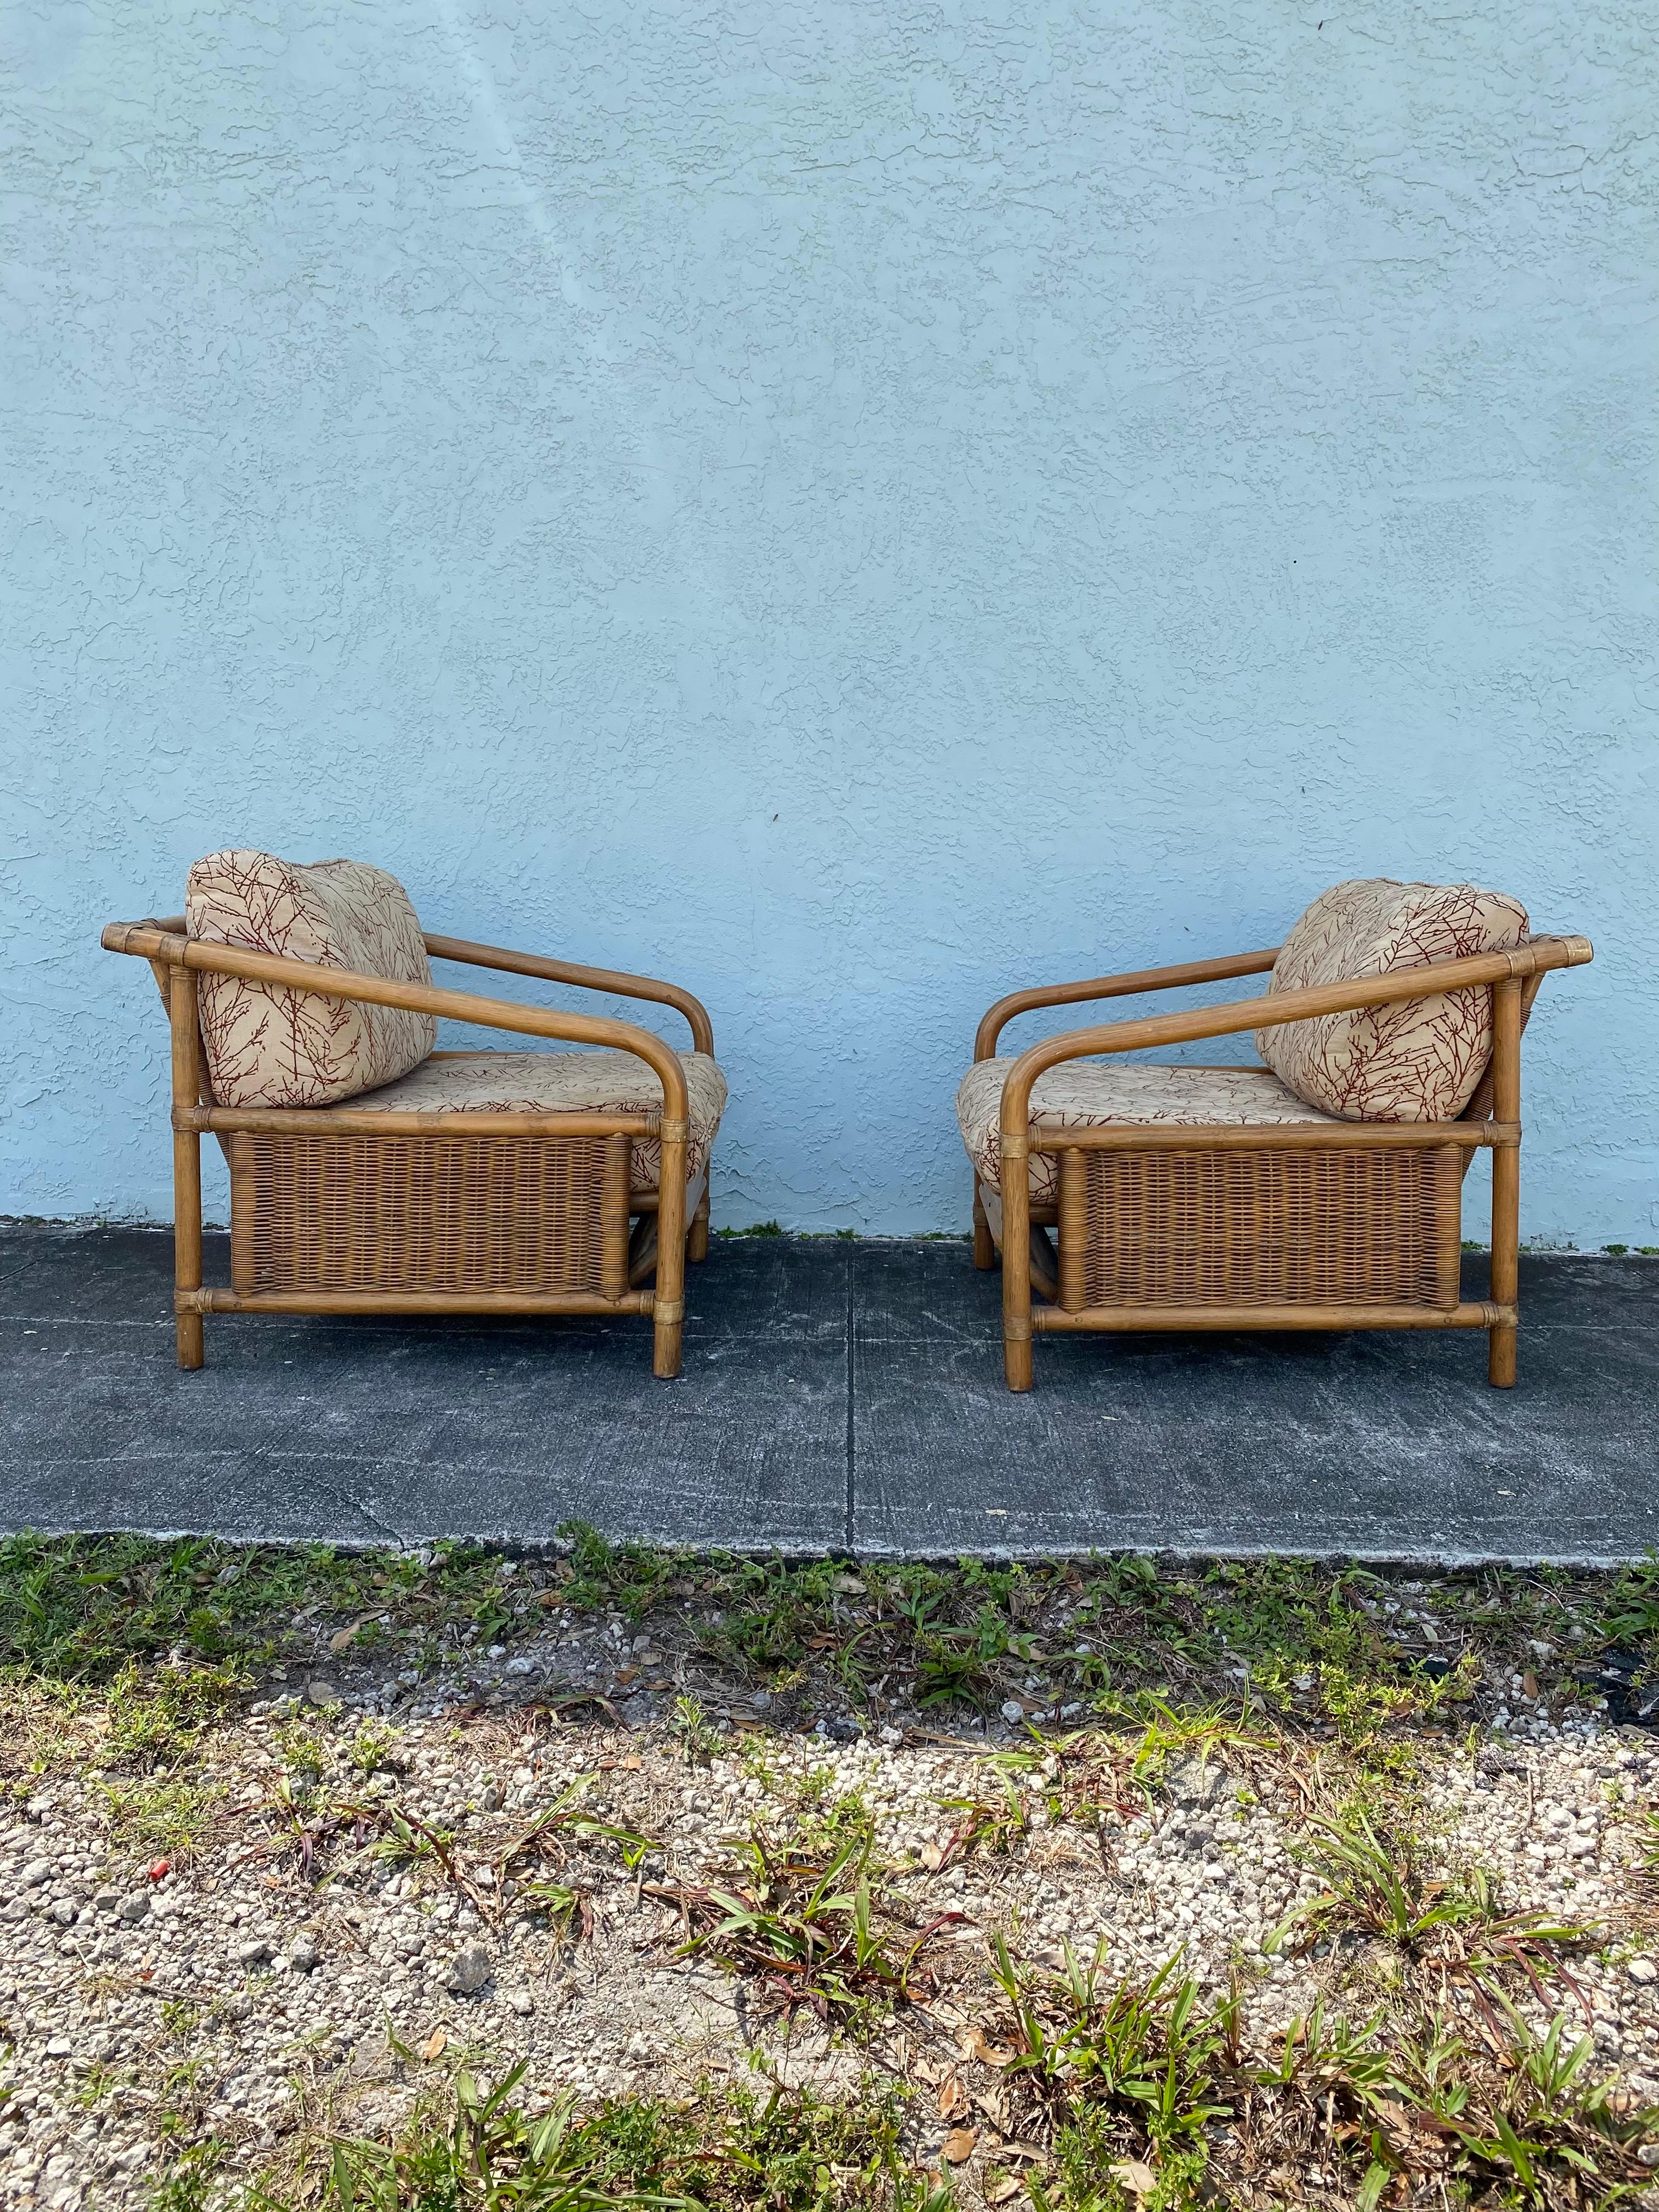 On offer on this occasion is one of the most stunning and rare reclined wicker chairs you could hope to find. Outstanding design is exhibited throughout. The beautiful set is statement piece and packed with personality!  Just look at the gorgeous